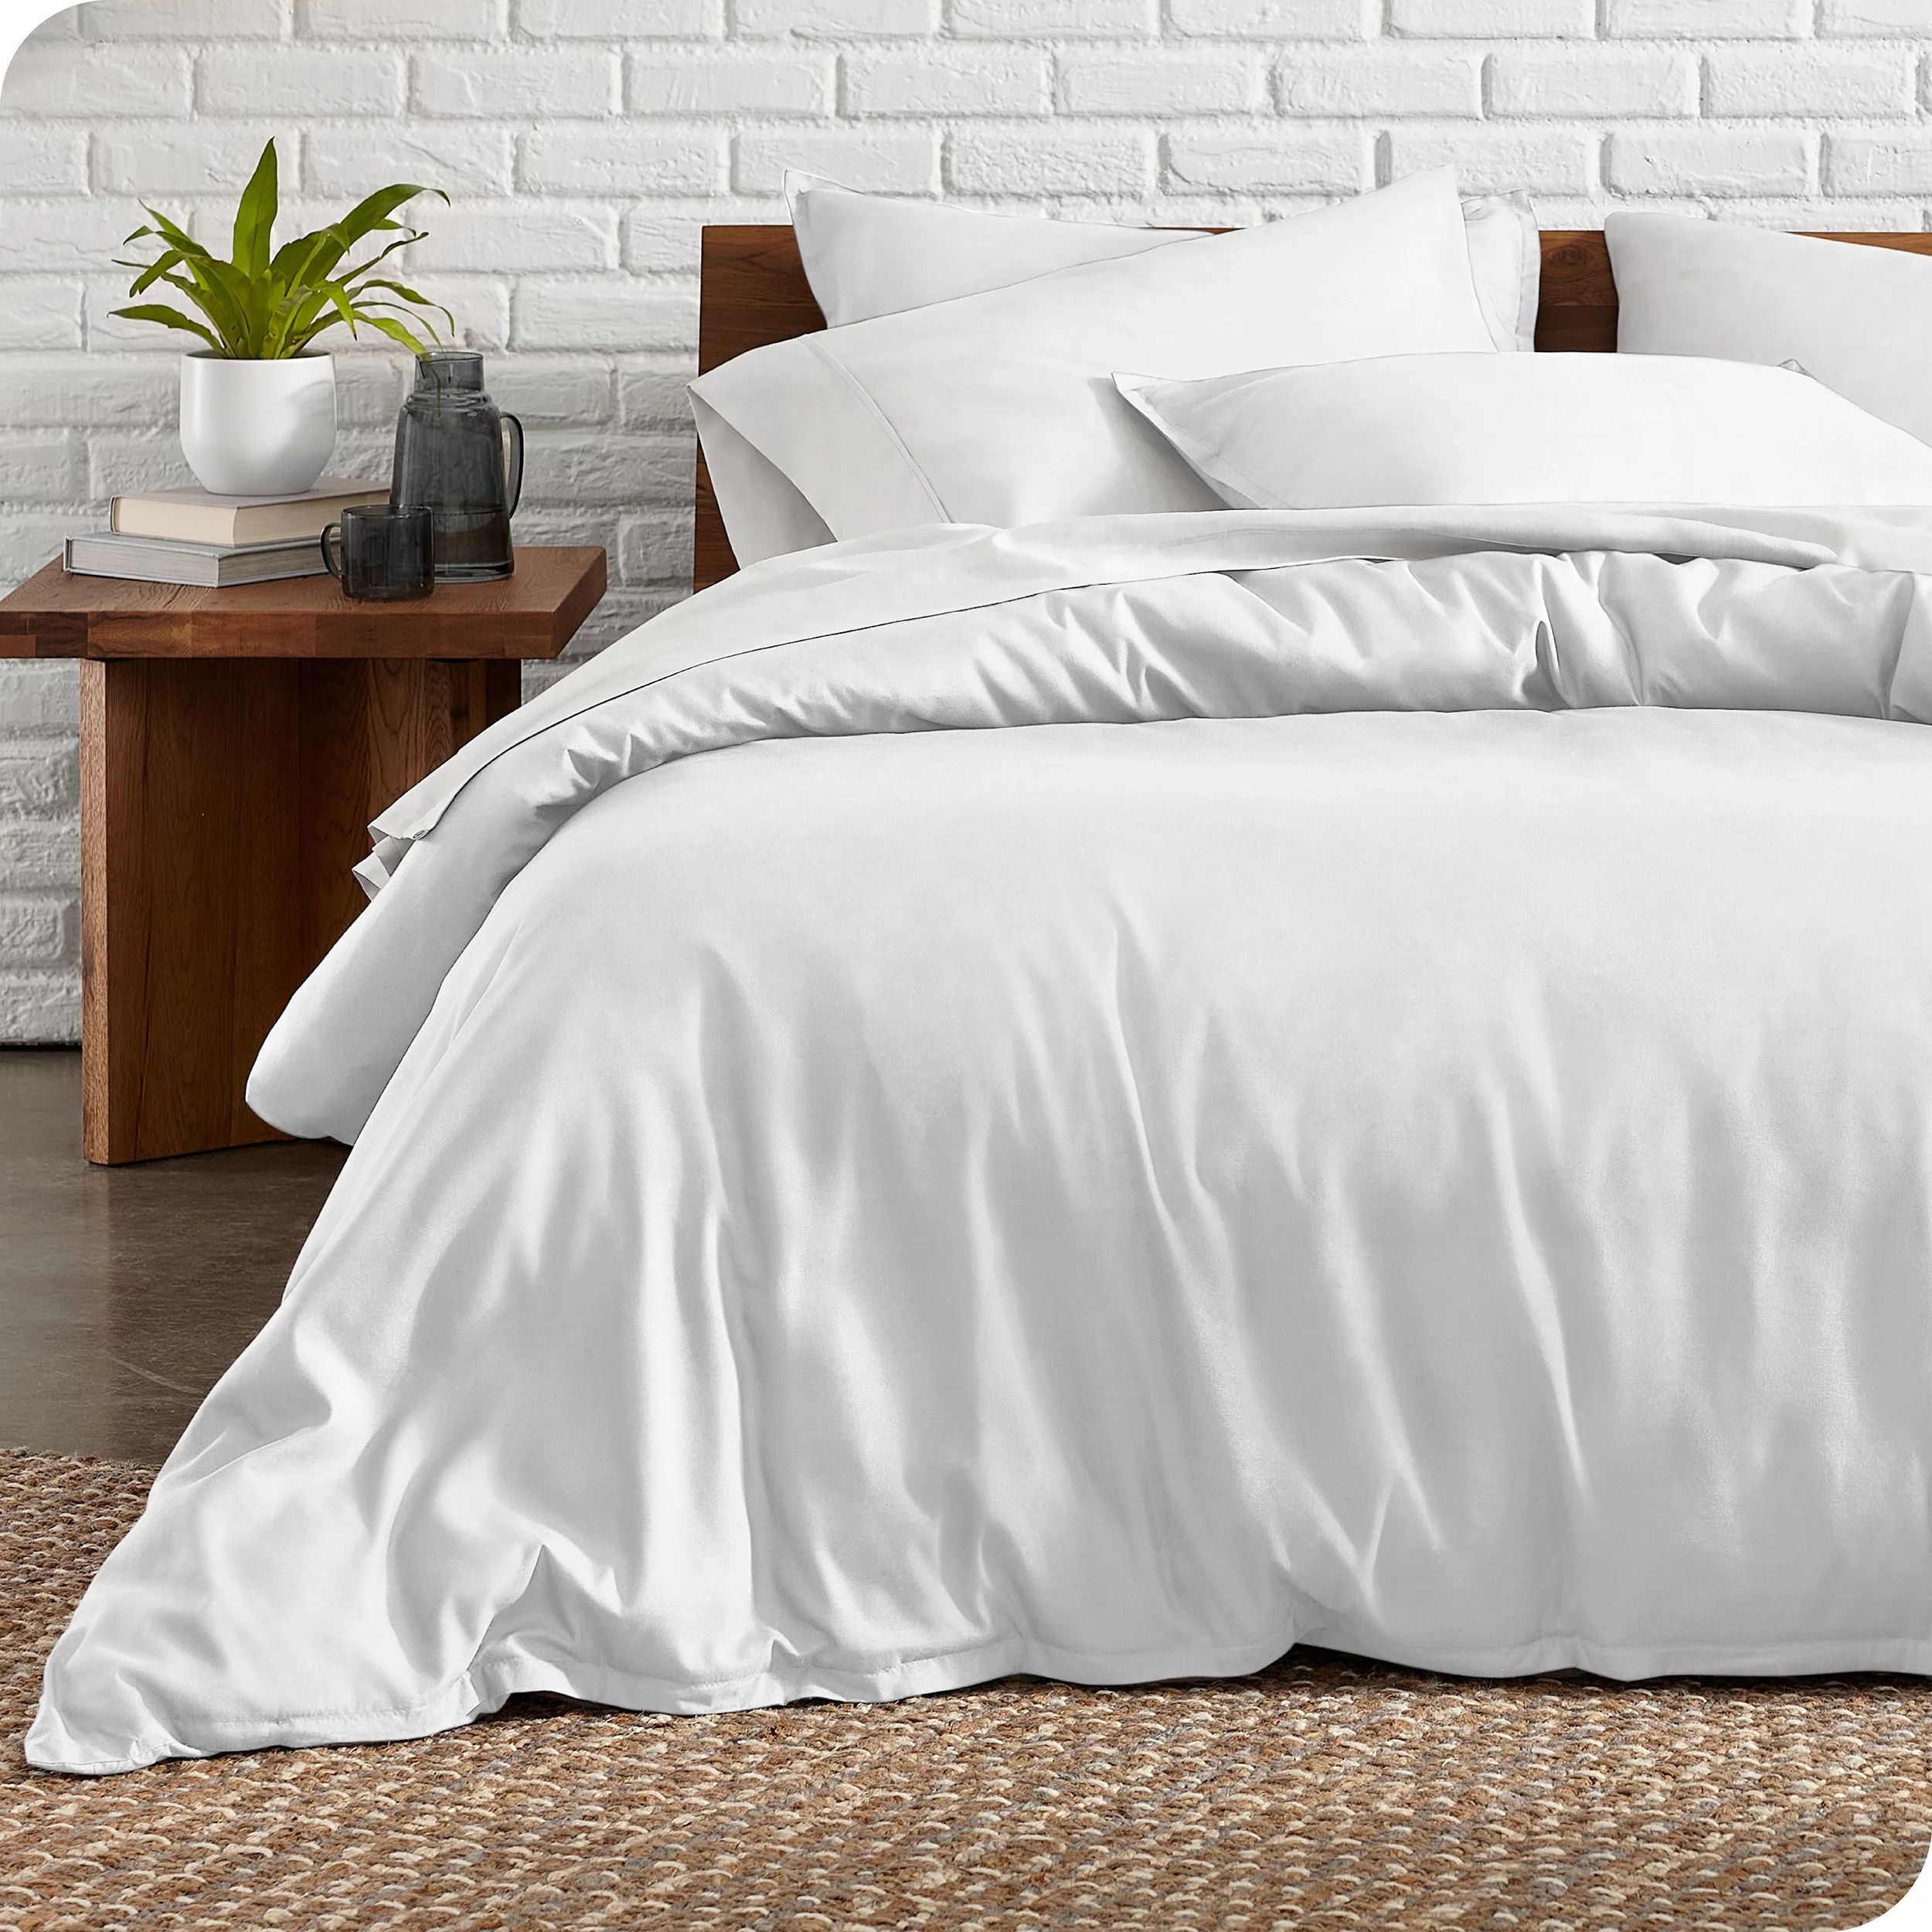 Bare Home 3 Piece Luxury Double Brushed Microfiber Duvet Cover Set, Queen, White | Walmart (US)